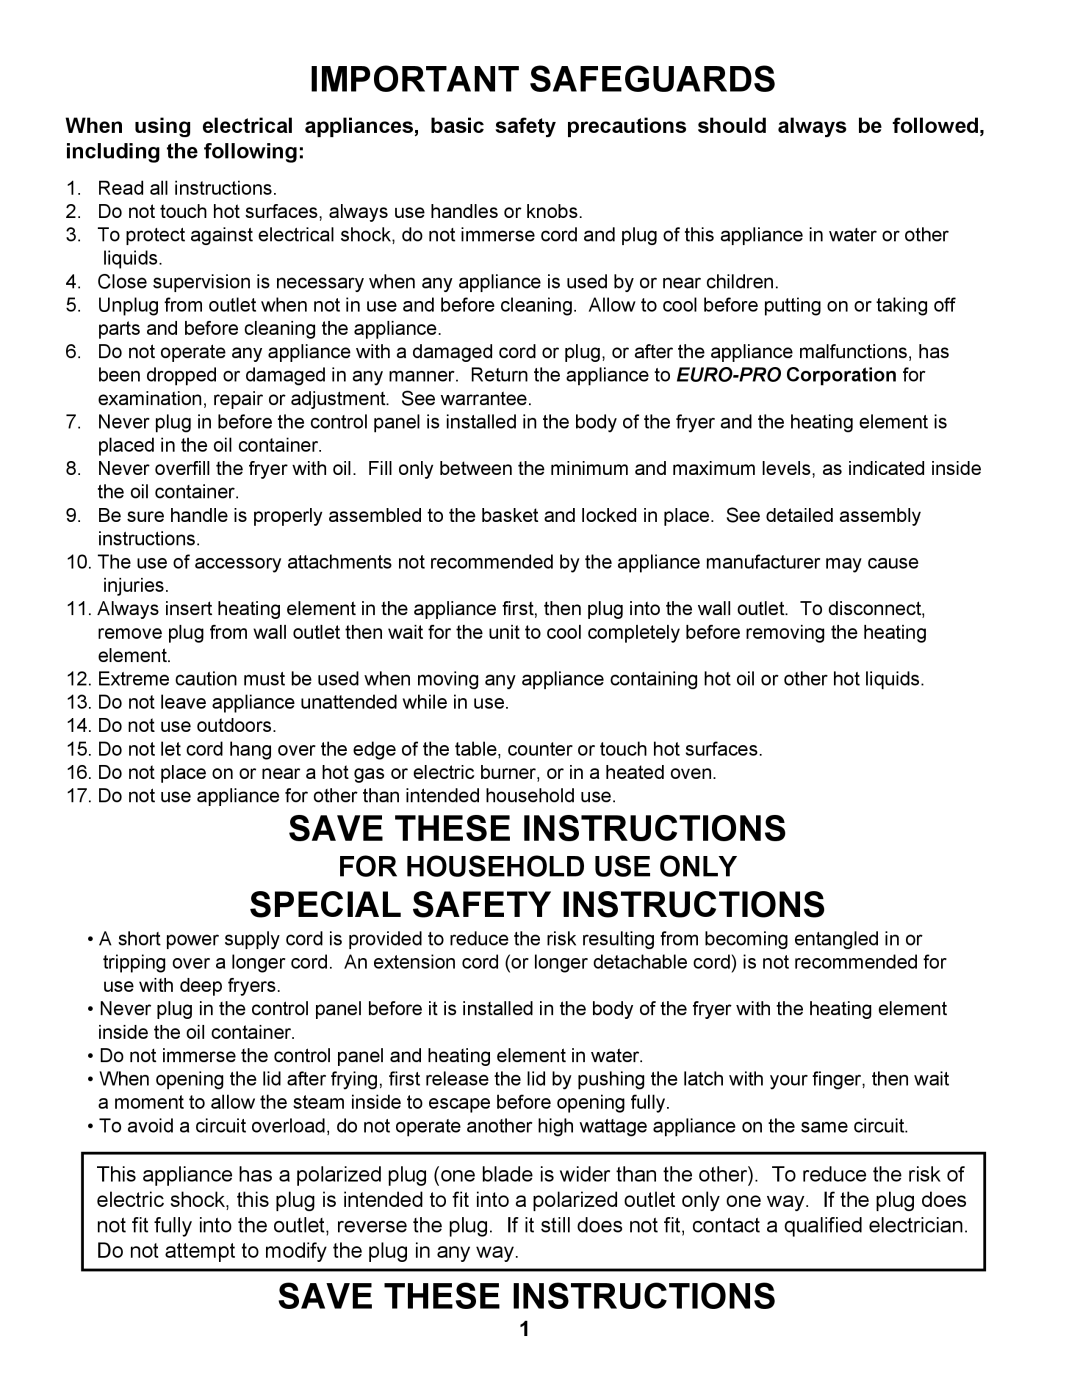 Bravetti EP65 manual For Household Use Only, Important Safeguards, Save These Instructions, Special Safety Instructions 